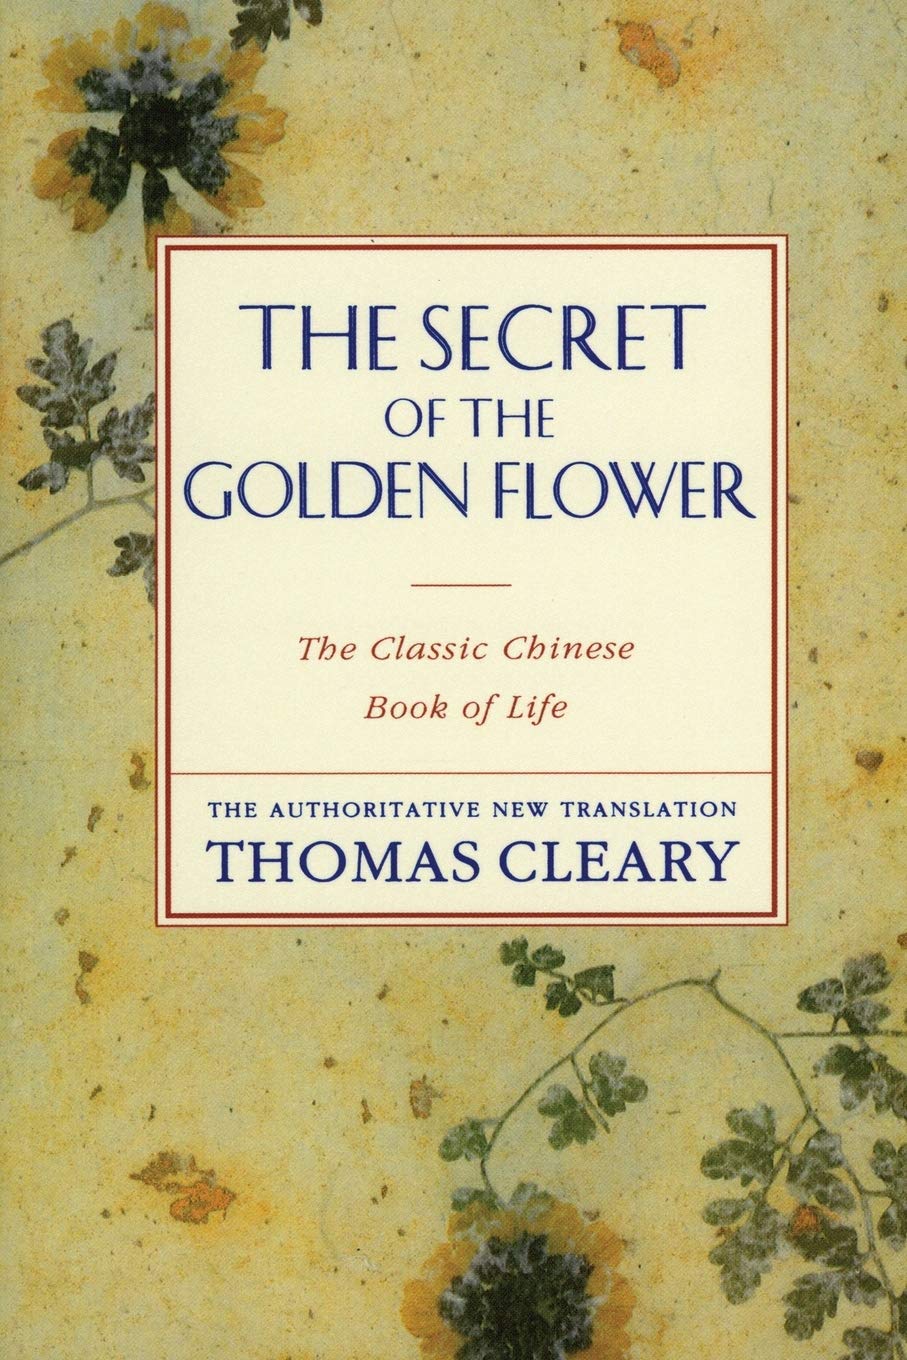 The Secret of the Golden Flower by Thomas Cleary